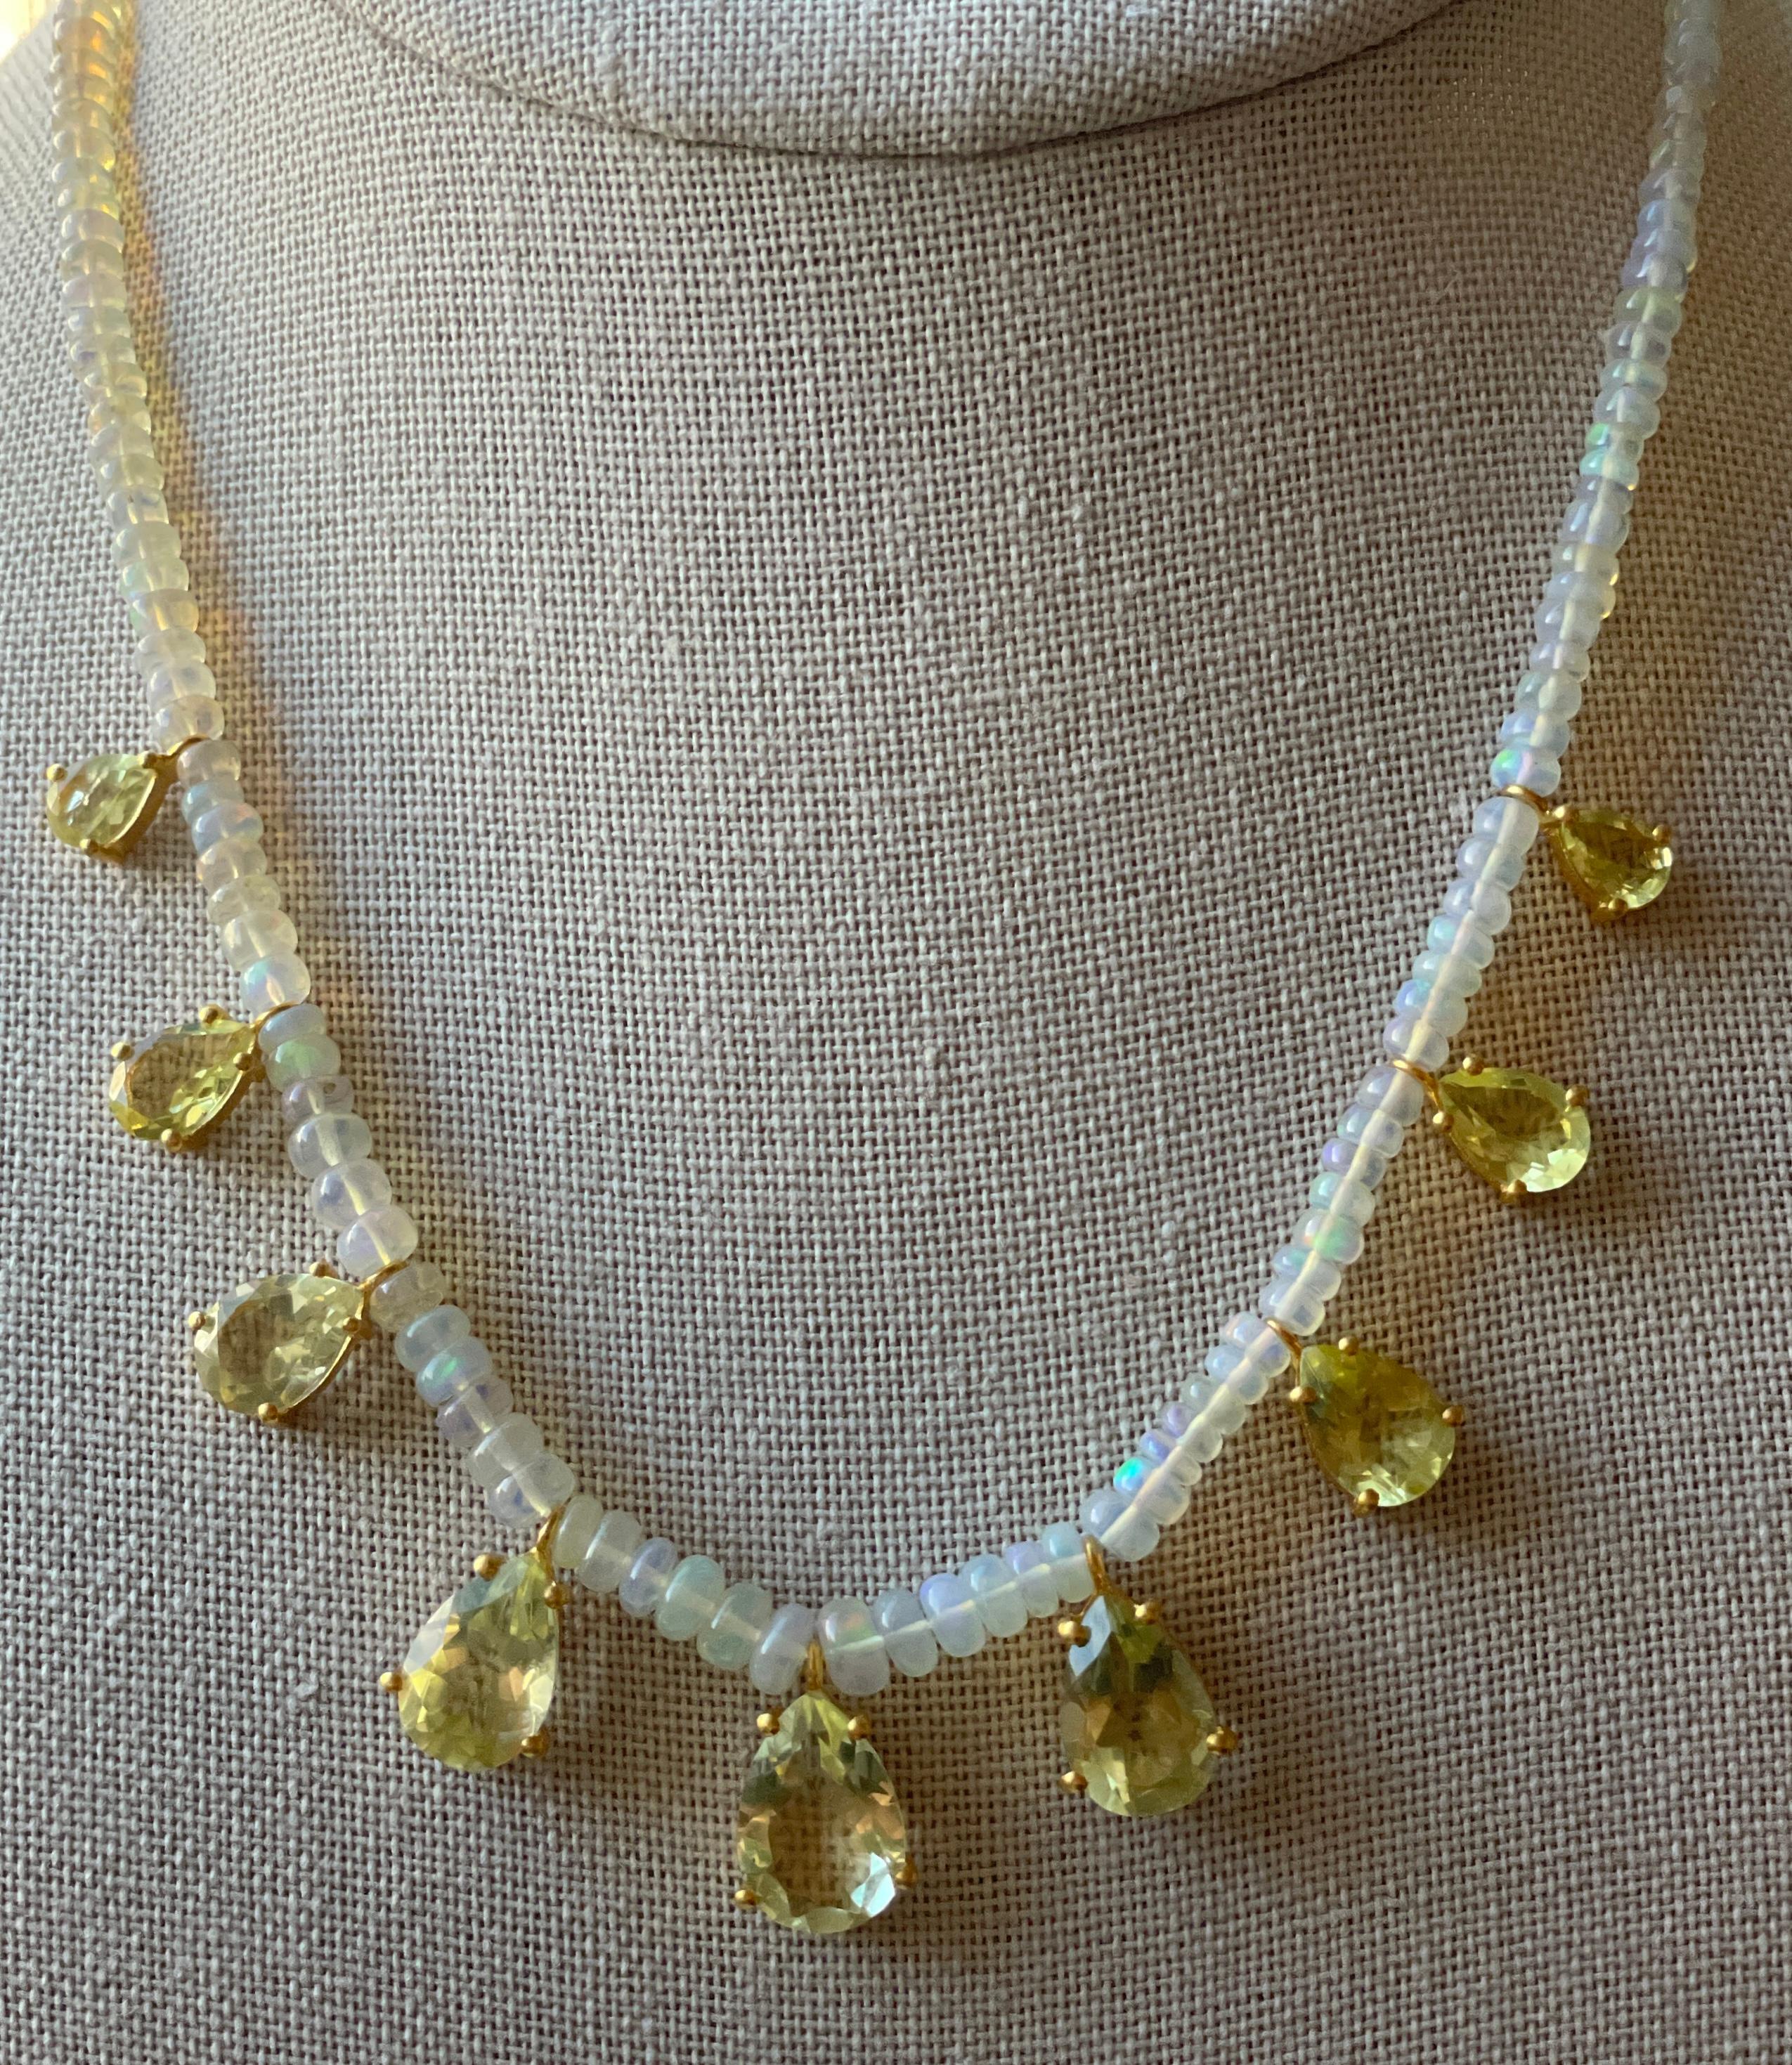 This gorgeous Opal and Lemon Topaz beaded necklace is comprised of 9 pear cut Lemon Topaz stones that are weighing over 20 carats. They are set in 14K matte gold plating which displays soft hues and tones of gold. The setting is minimal allowing for